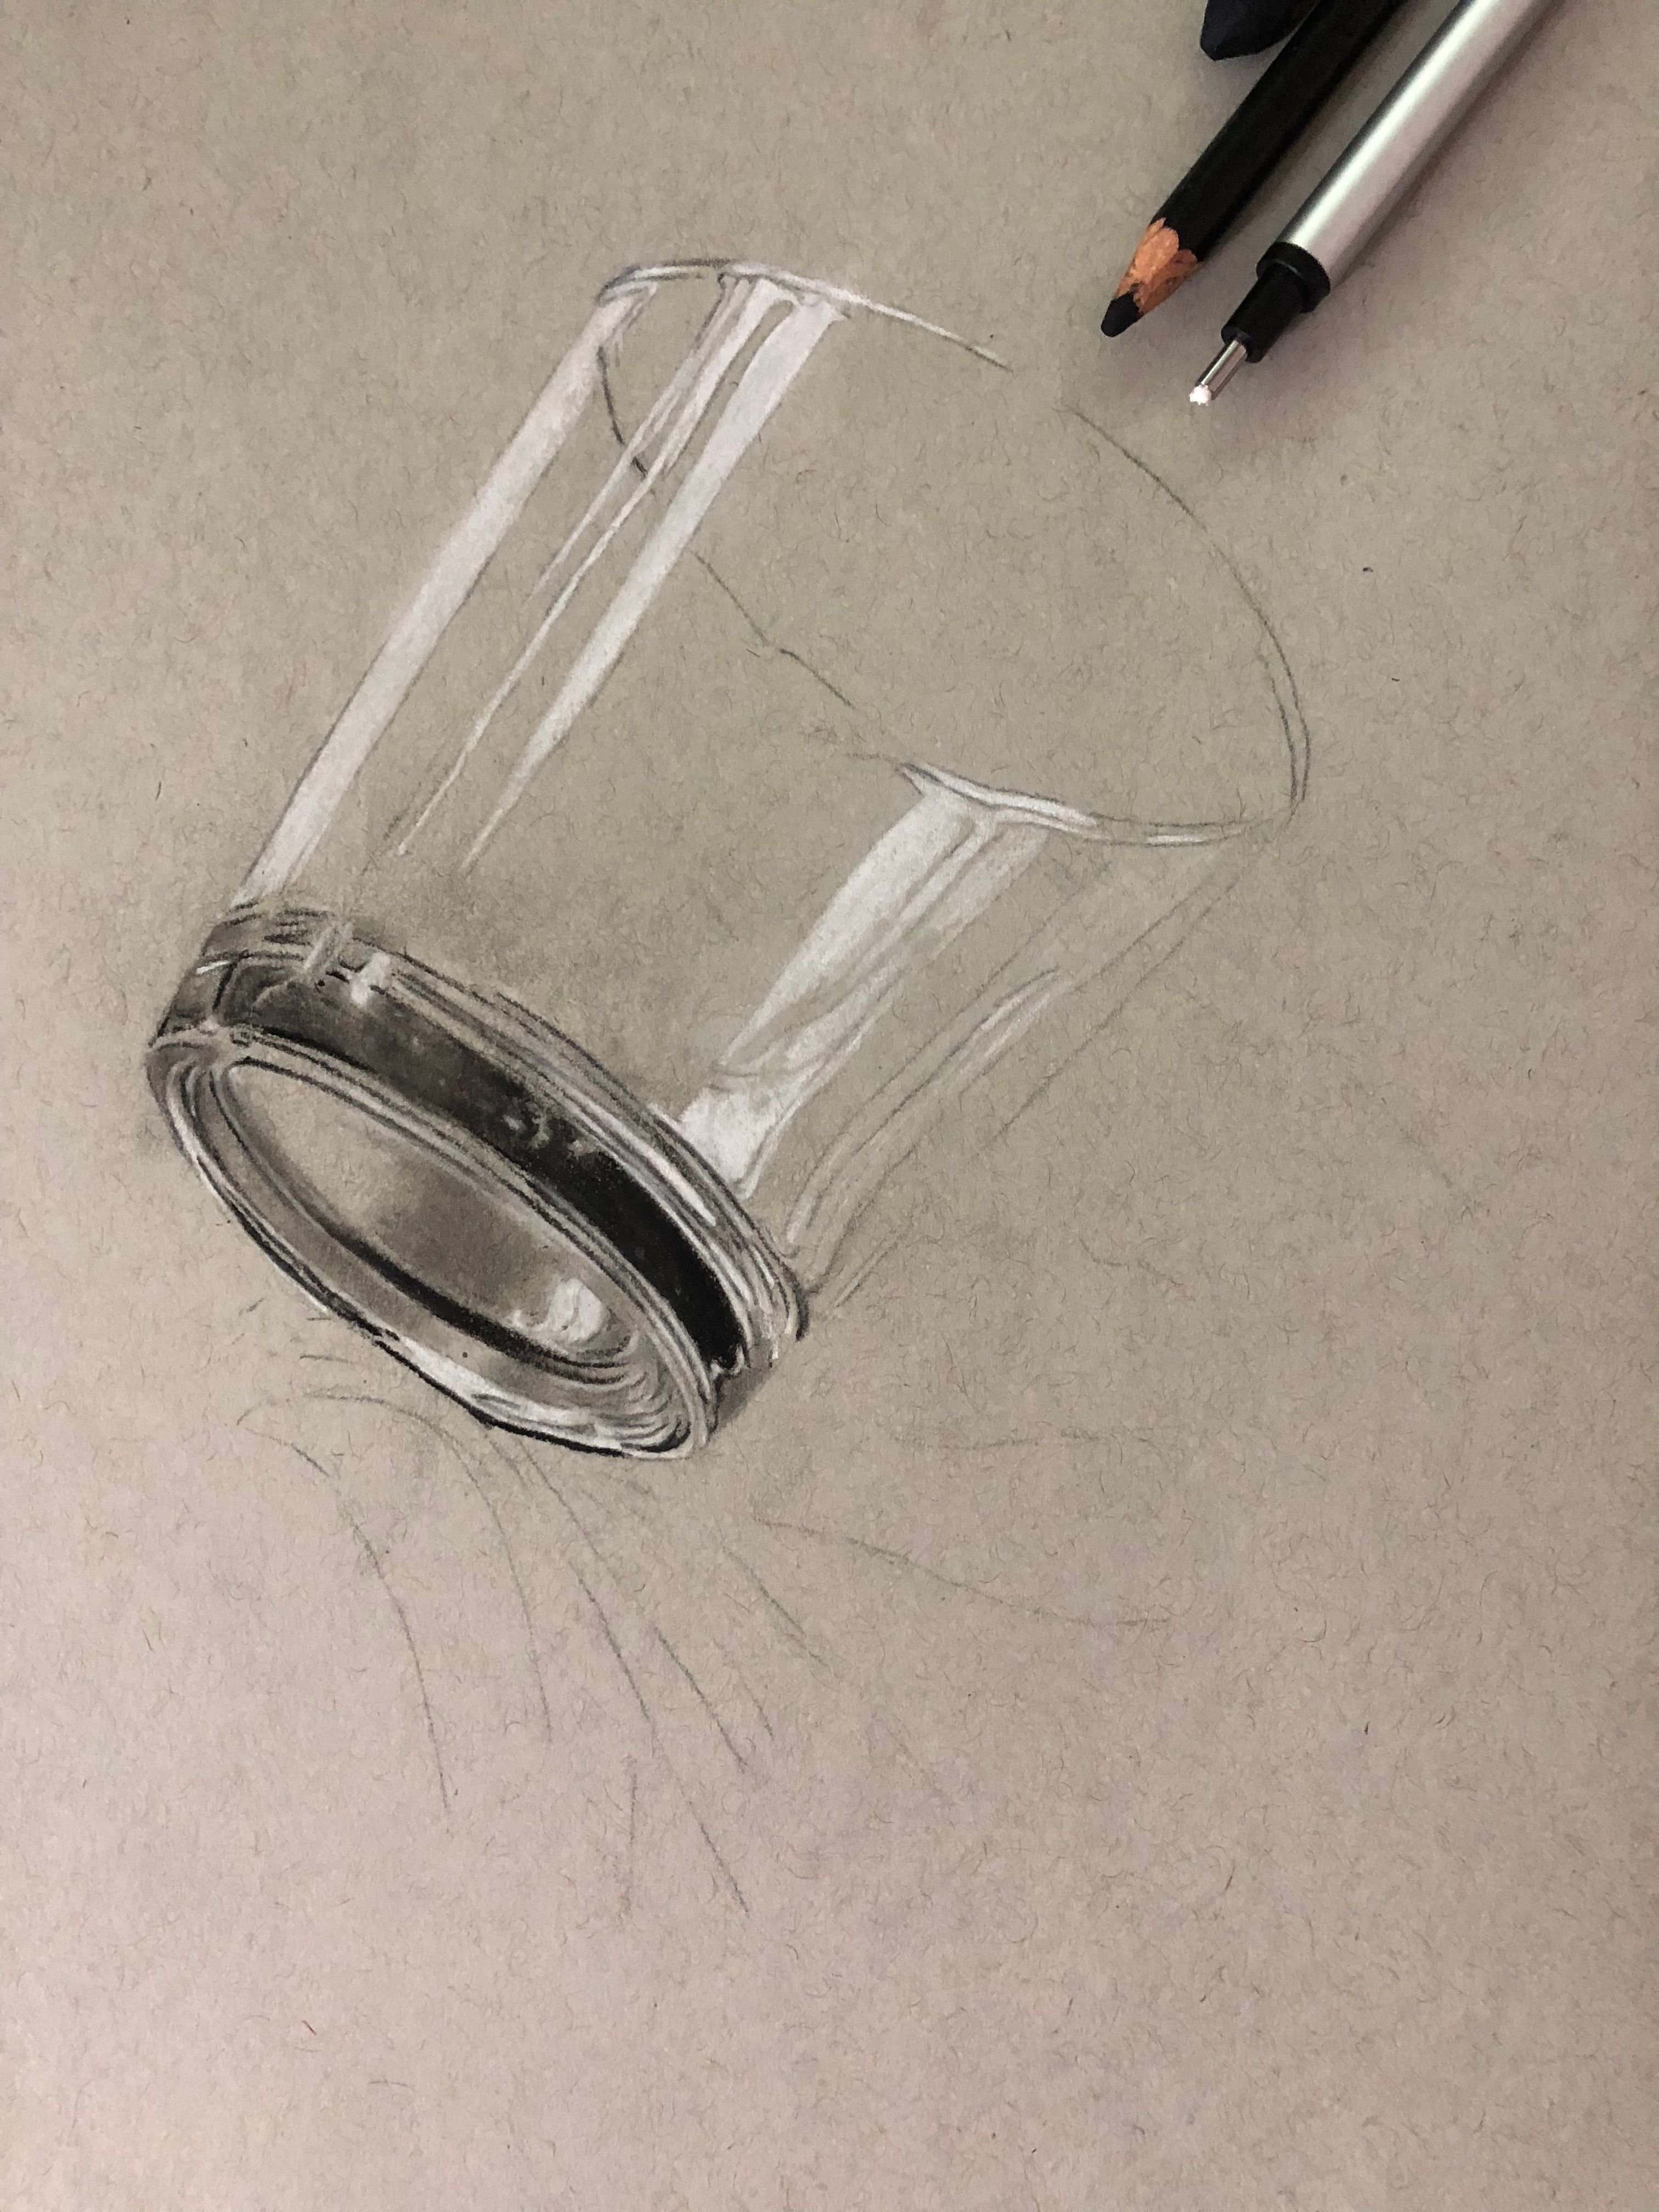 Realism Art How To Draw A 3d Object